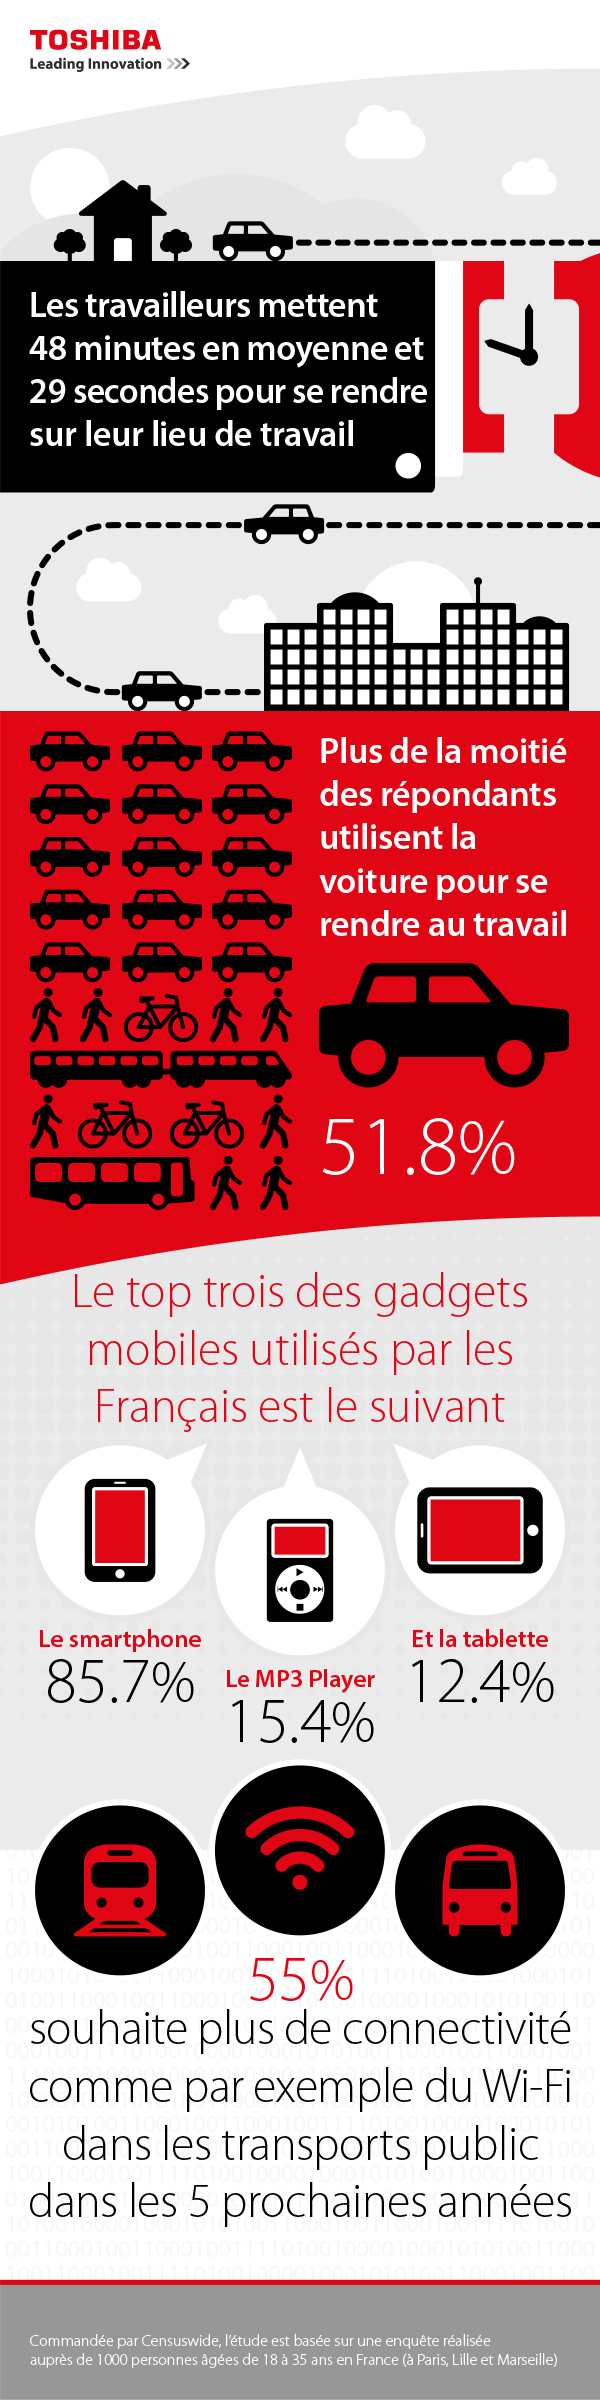 infographie Toshiba connect transport